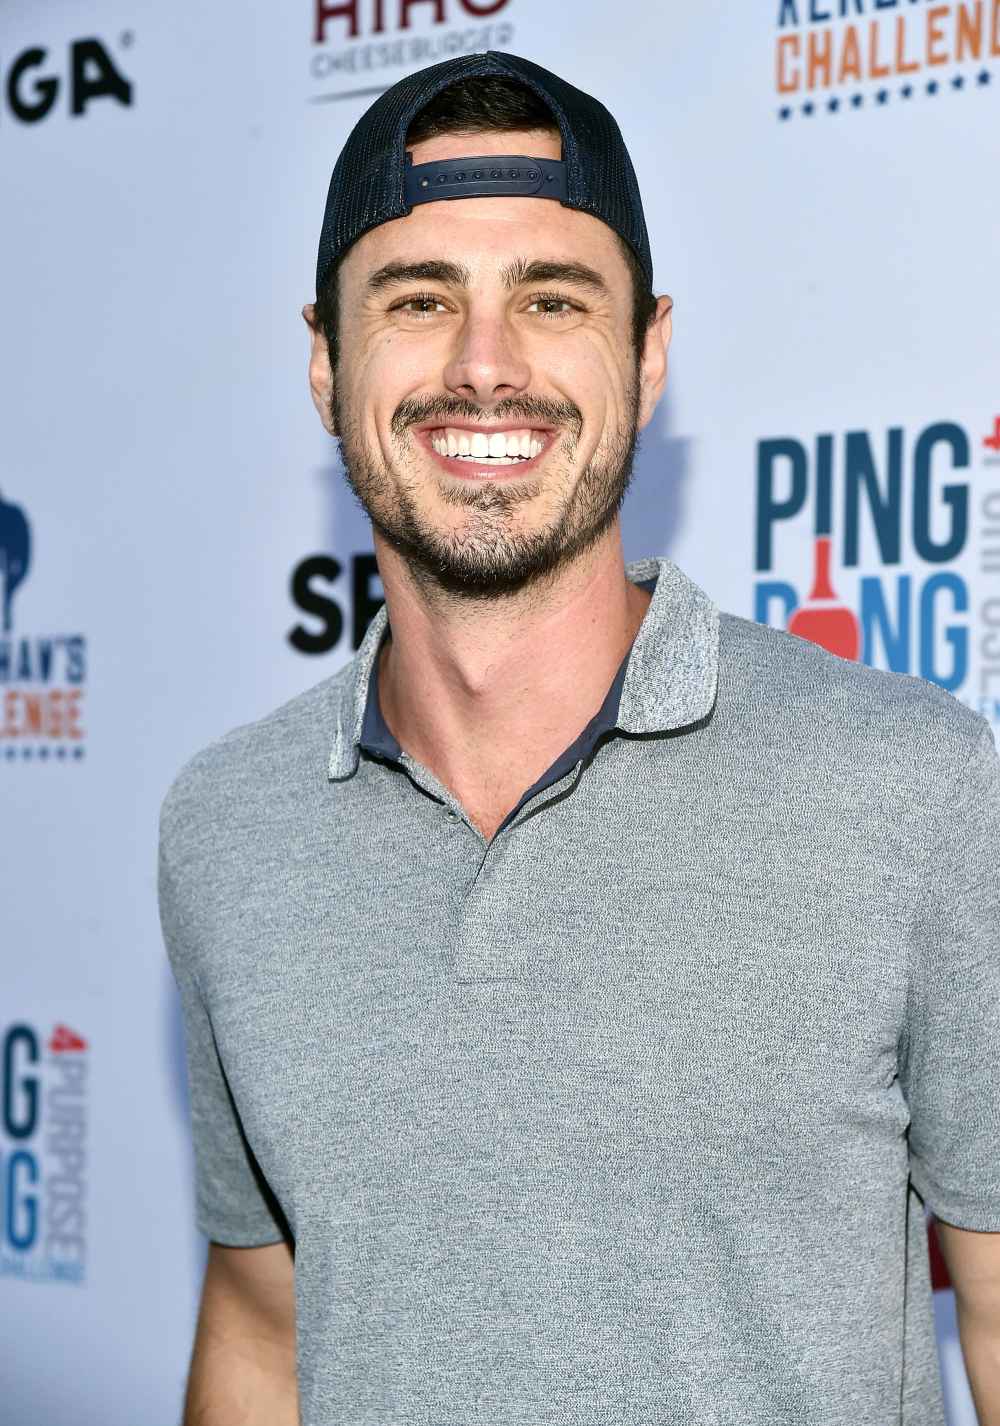 Bachelor Nation’s Ben Higgins Is Dating Someone New: ‘She’s the Best’